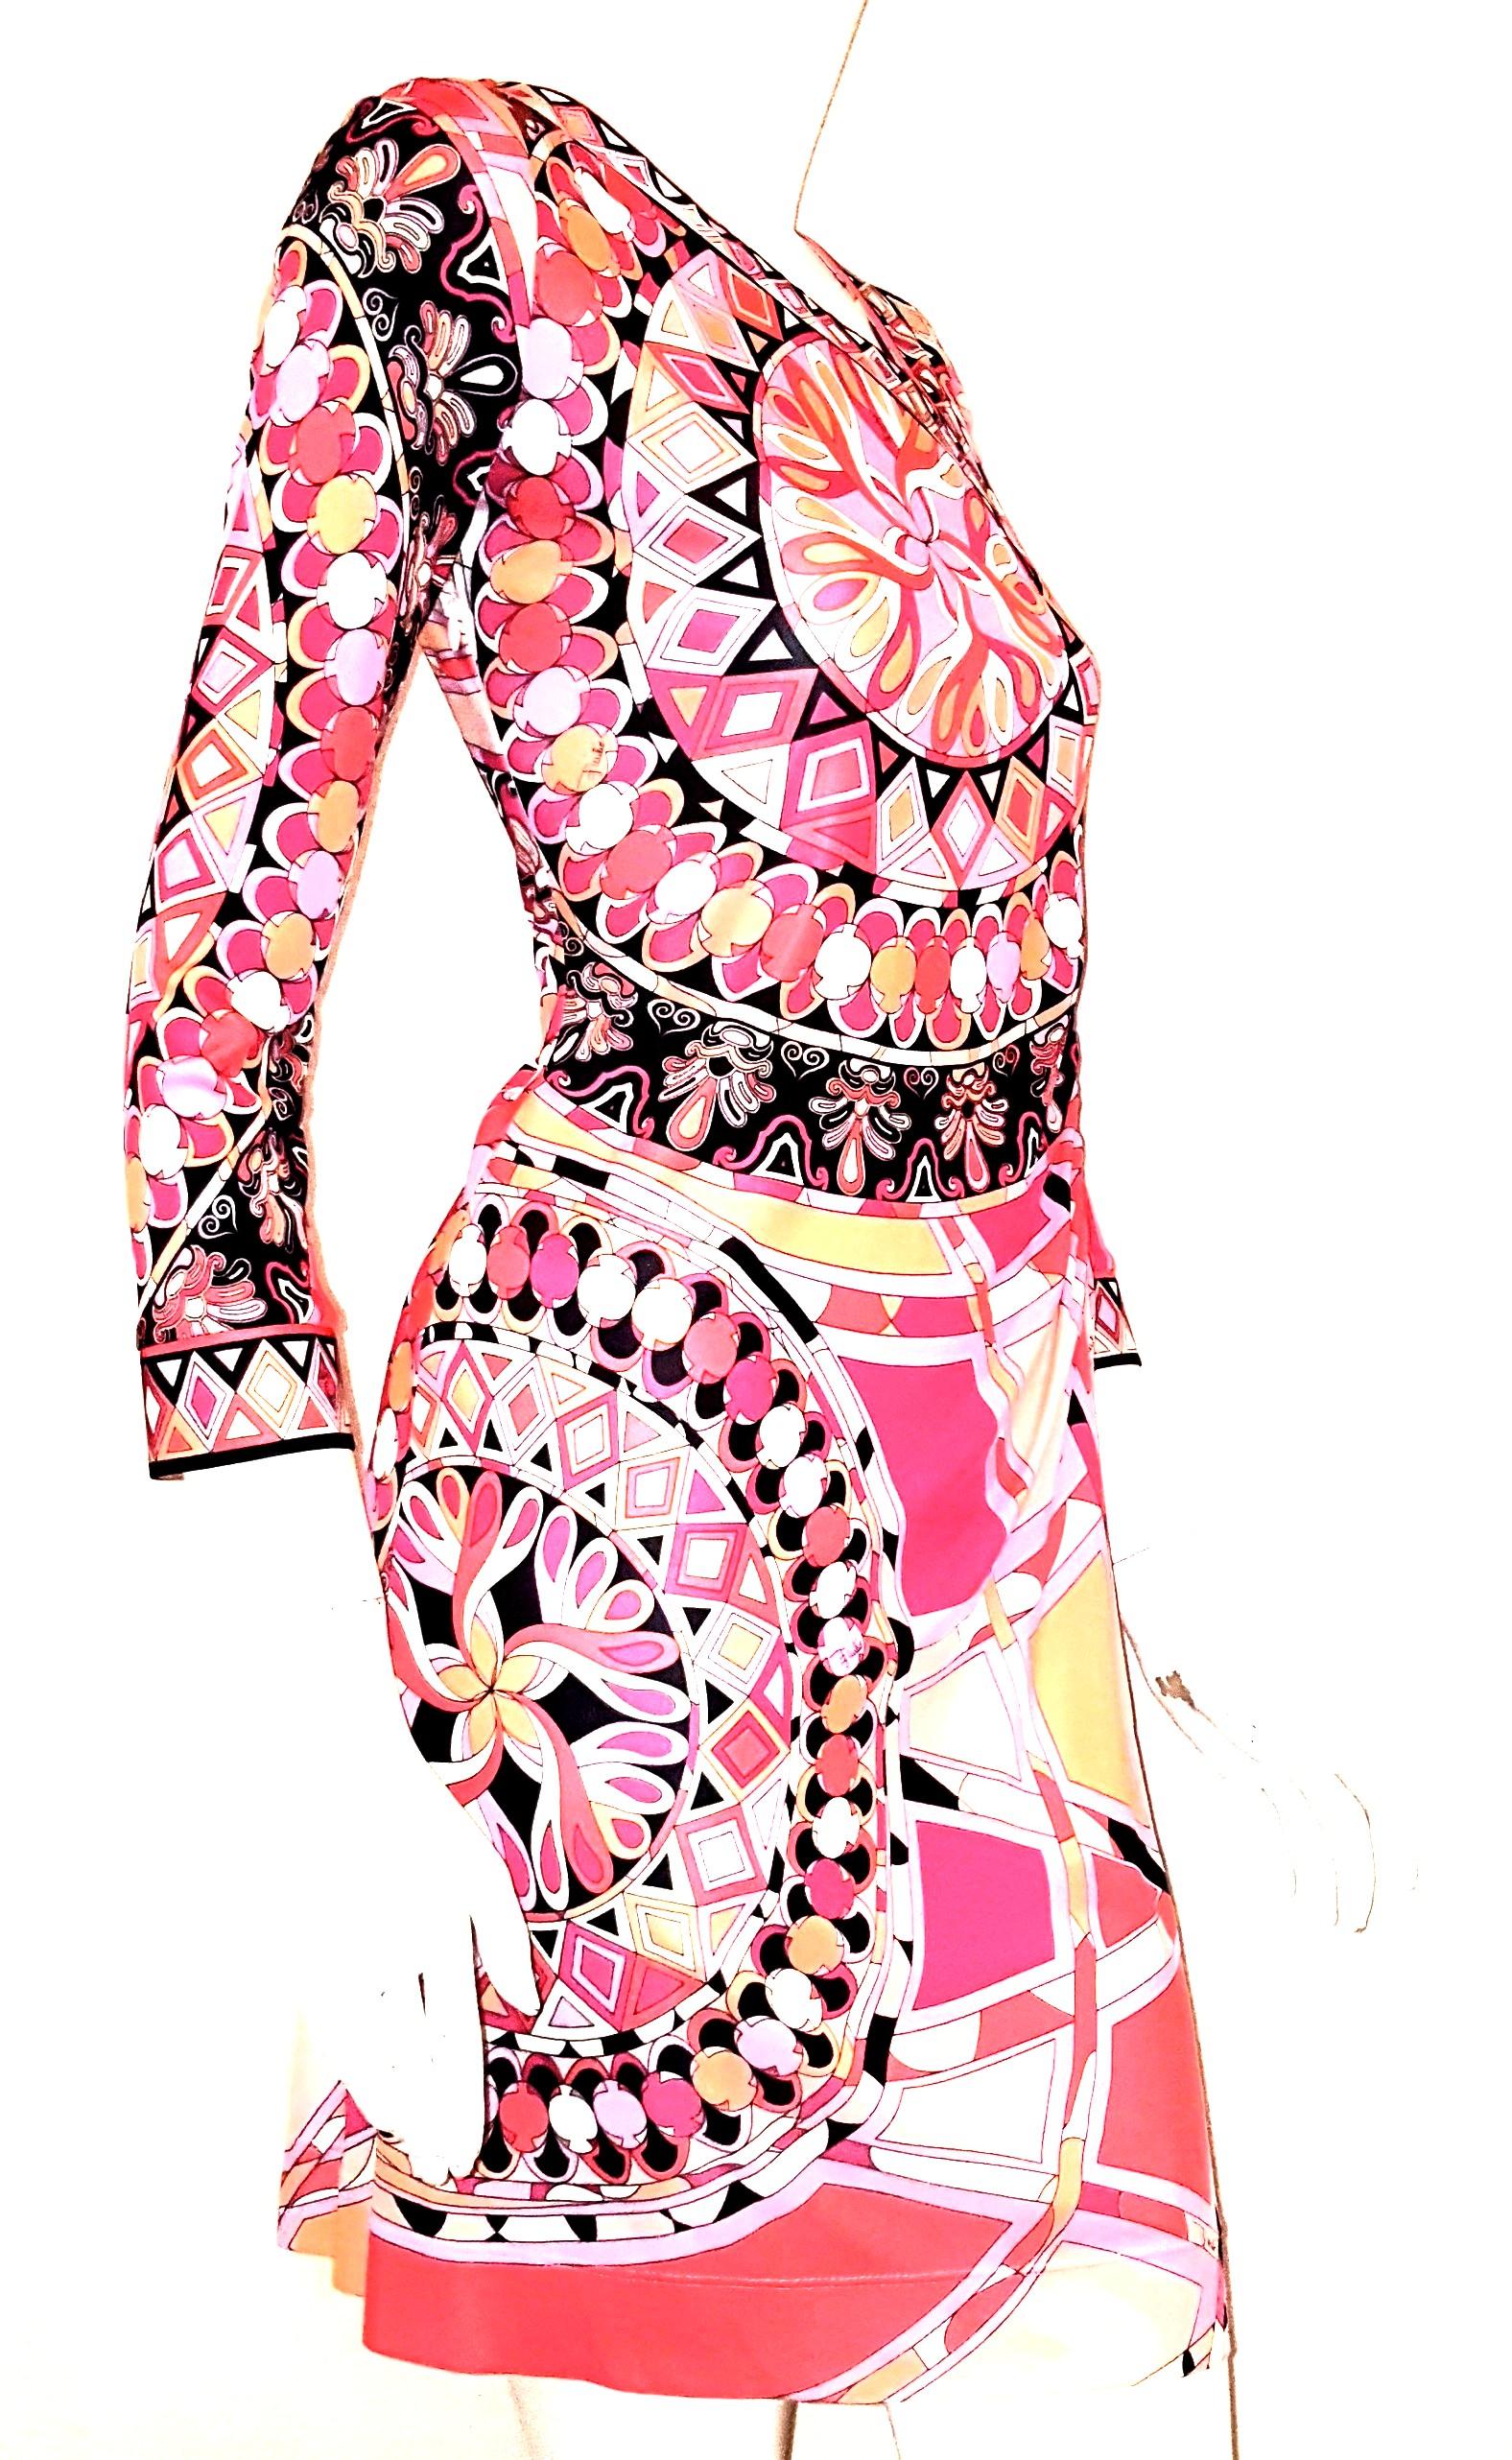 Emilio Pucci pink abstract print dress is gathered at the waistline to further accentuate the waist.  This dress has an asymmetric V neckline with the accent to the left of the dress, as well as the loose folds around the waistline.  The 3/4 sleeves